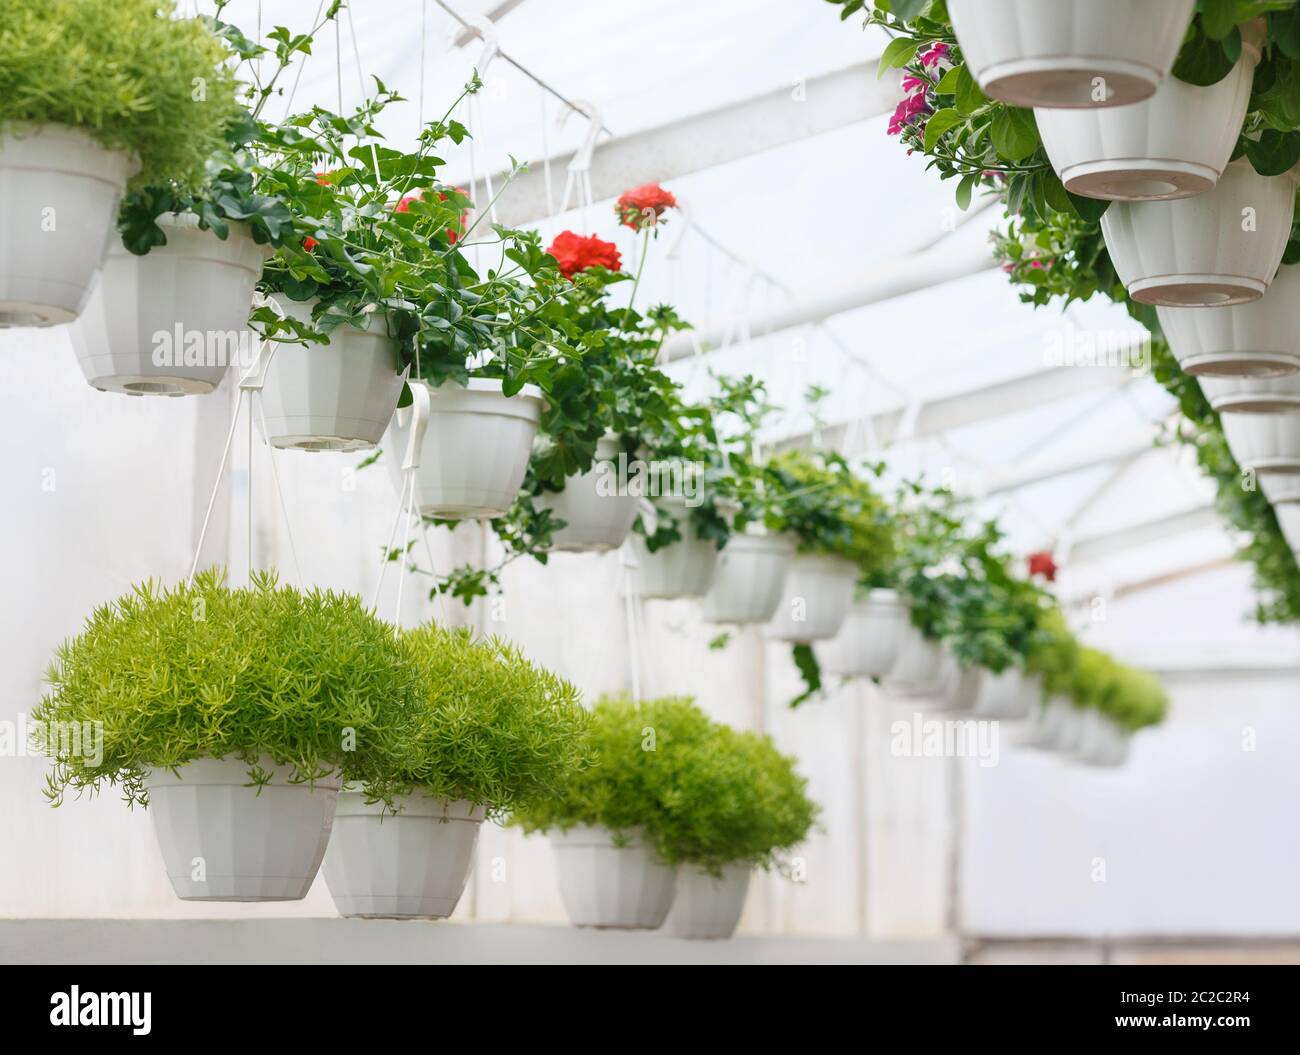 Modern flower farm. Red roses in pots hang under ceiling and green plants in pots Stock Photo